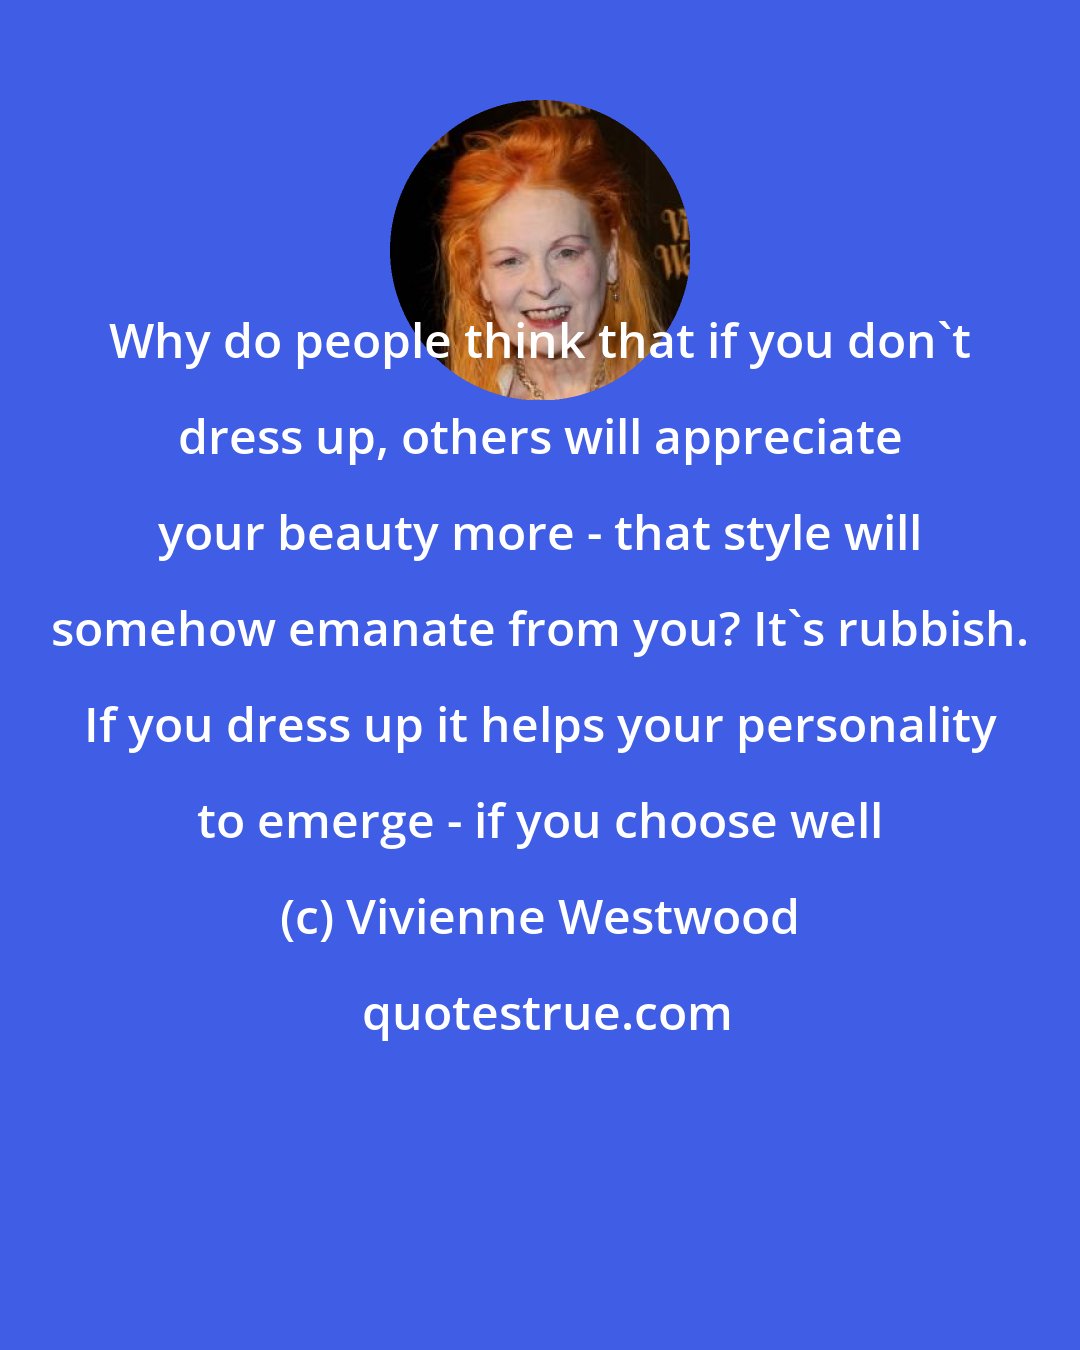 Vivienne Westwood: Why do people think that if you don't dress up, others will appreciate your beauty more - that style will somehow emanate from you? It's rubbish. If you dress up it helps your personality to emerge - if you choose well